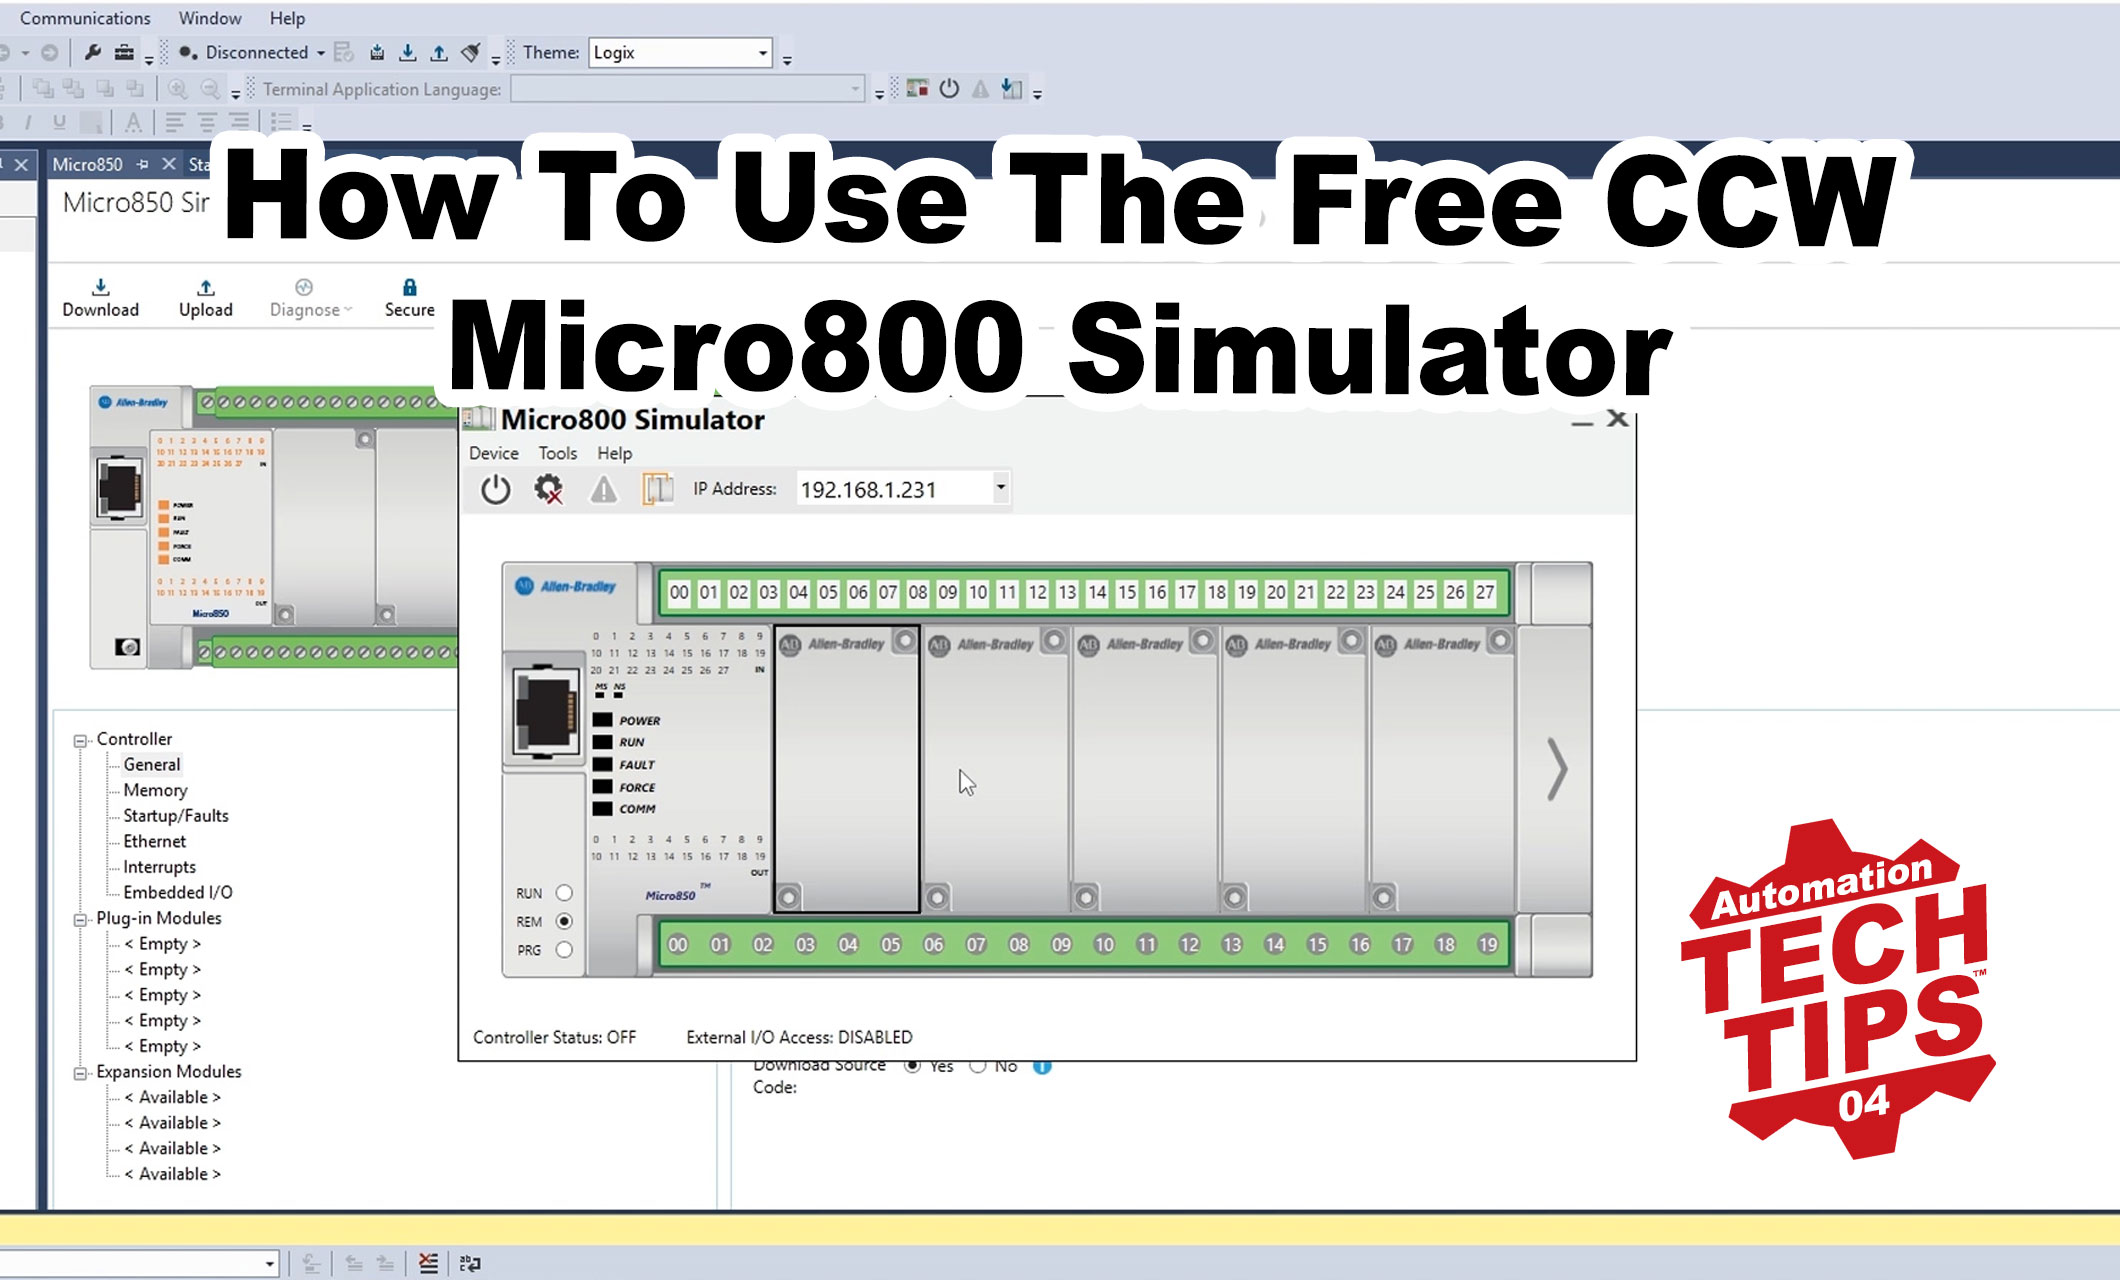 CCW - How to use the free Micro800 Simulator (T004)